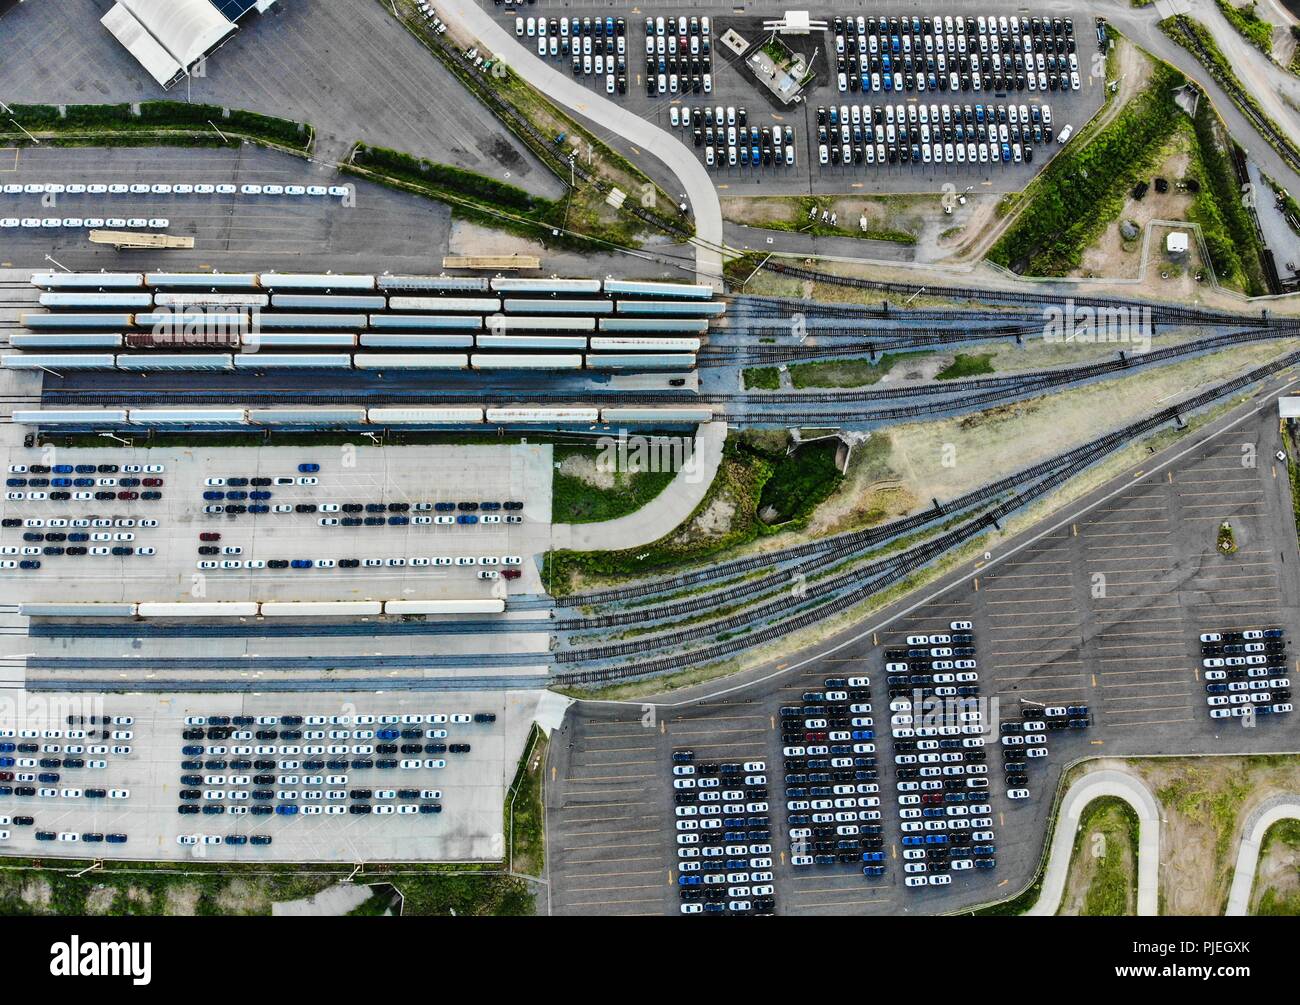 Aerial view of the Ford Motor Company automotive company in the Hermosillo industrial park, Sonora Mexico. Hundreds of new cars ready and arranged in order in the yard to be transported in train cars to the Automotive Industry market in the USA. Hermosillo Stamping and Assembly is an automobile assembly plant of the Ford brand. The plant currently assembles the Ford Fusion and Lincoln MKZ, Lincoln models for the North American market. Auto business Ford is an American multinational automaker. Photo: (NortePhoto / LuisGutierrez) ...  Vista aérea de empresa automotriz Ford Motor Company en el pa Stock Photo